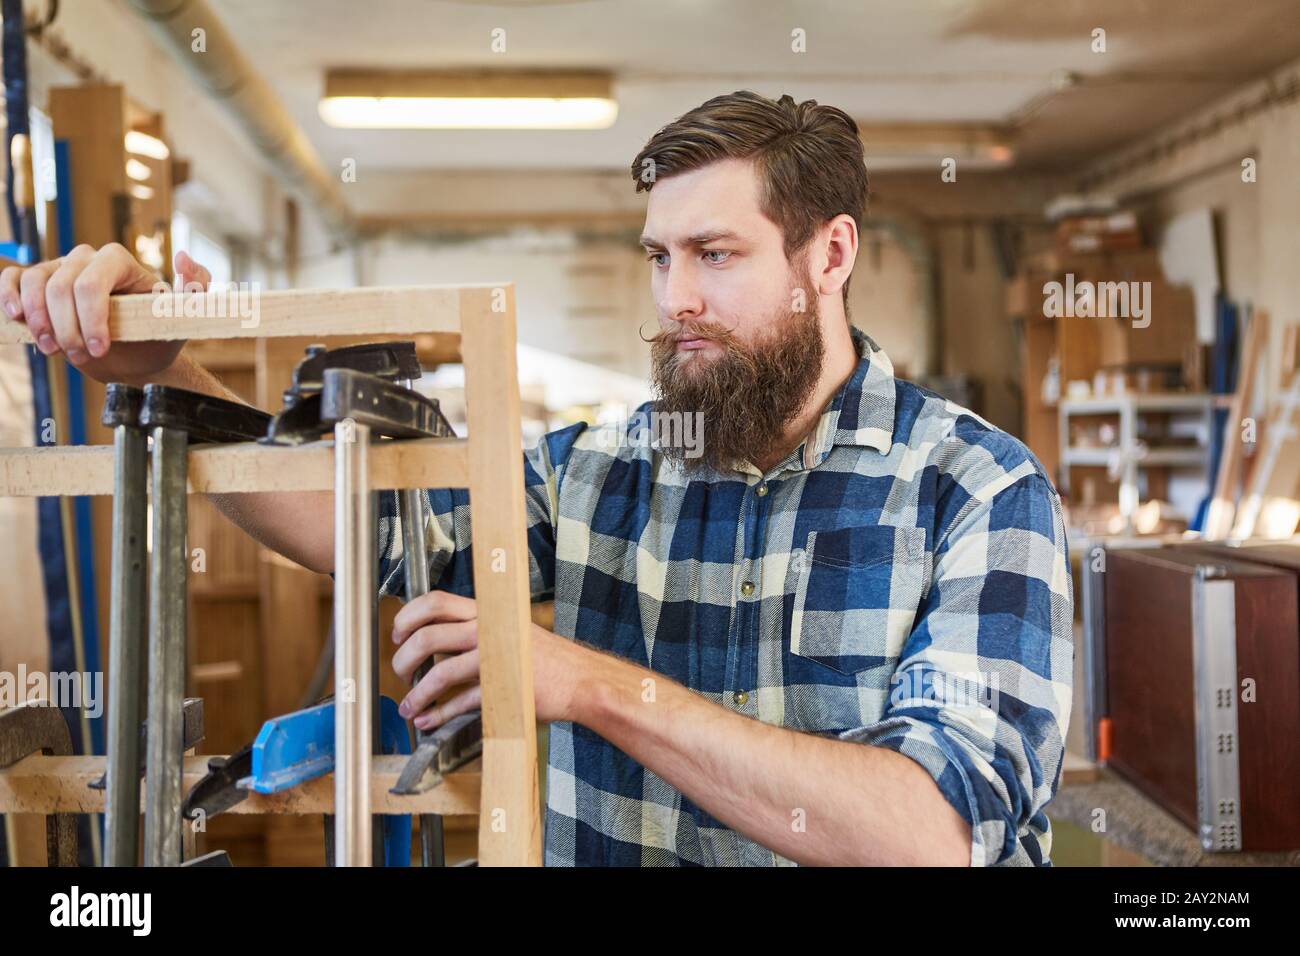 Hipster carpenter sorts screw clamps in the joinery or joinery Stock Photo